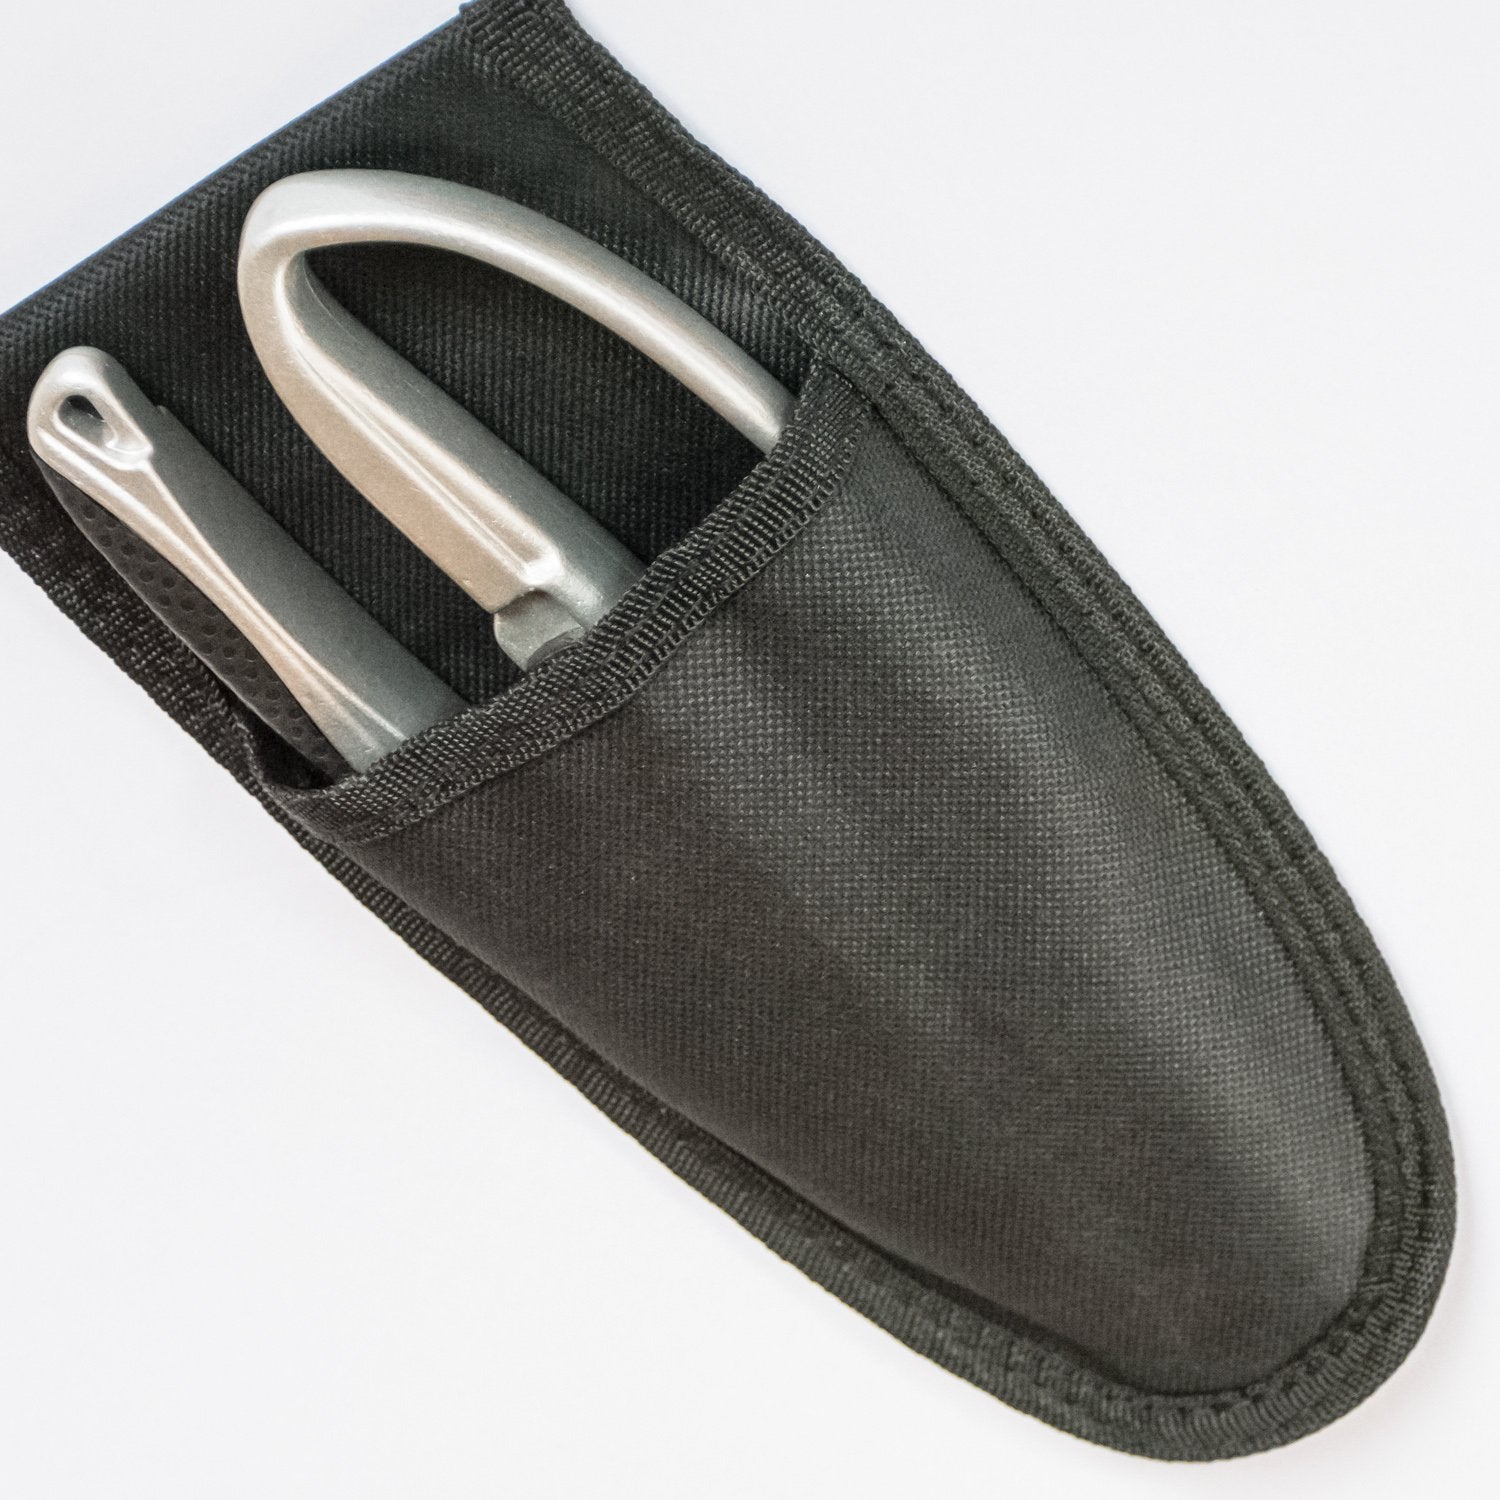 Heavy-duty nylon holster for pruning shears, compatible with TGF and other brands.